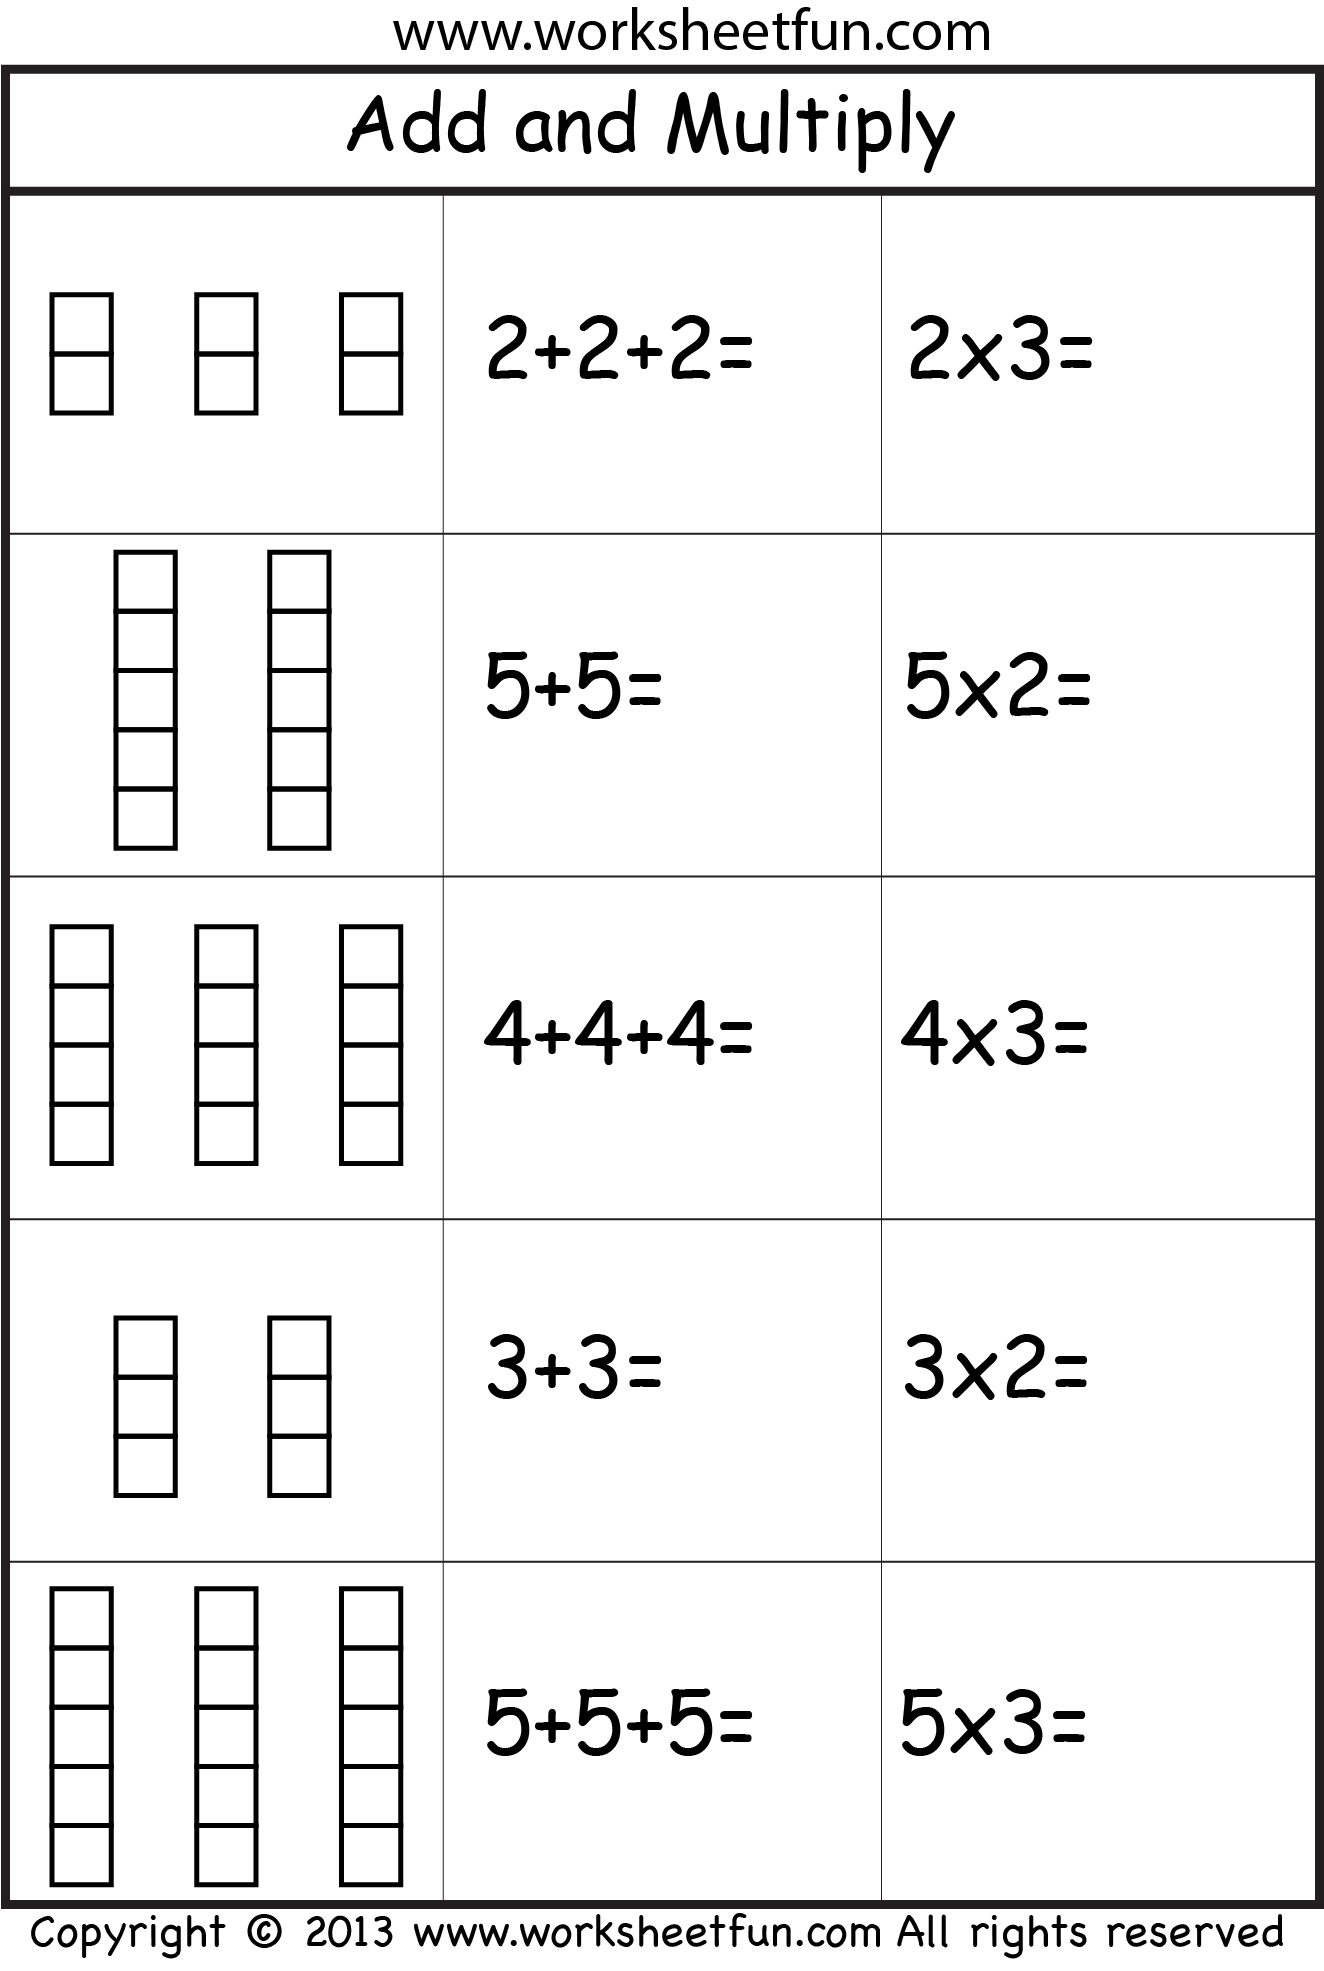 multiplication-as-repeated-addition-worksheet-multiplication-worksheets